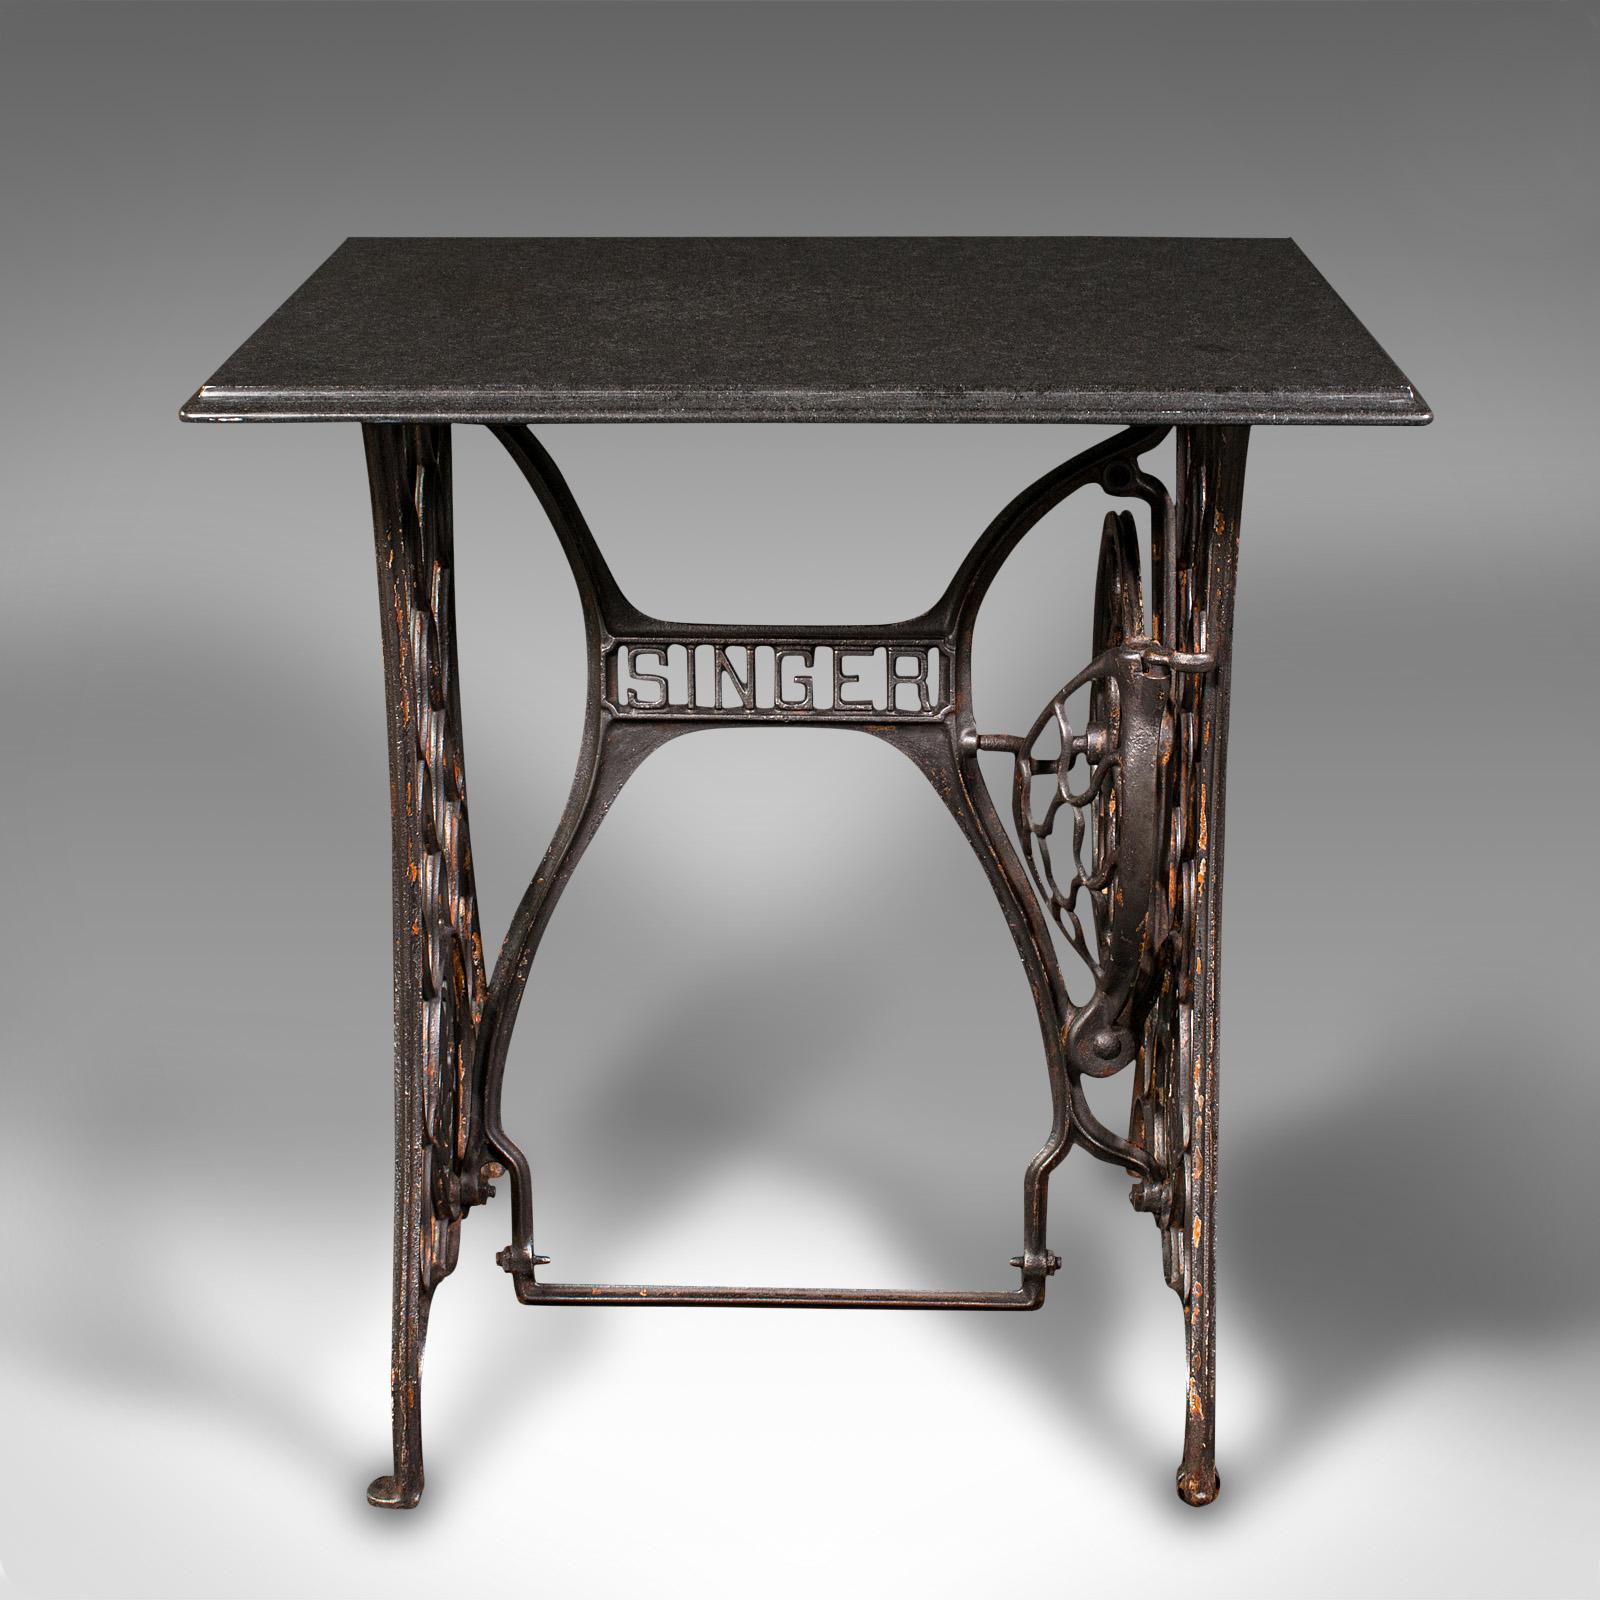 This is an antique orangery potting table. An English, granite and cast iron garden table, dating to the Victorian period and later, circa 1900.

Beautifully presented Victorian sewing machine table, with bespoke top
Displays a desirable aged patina